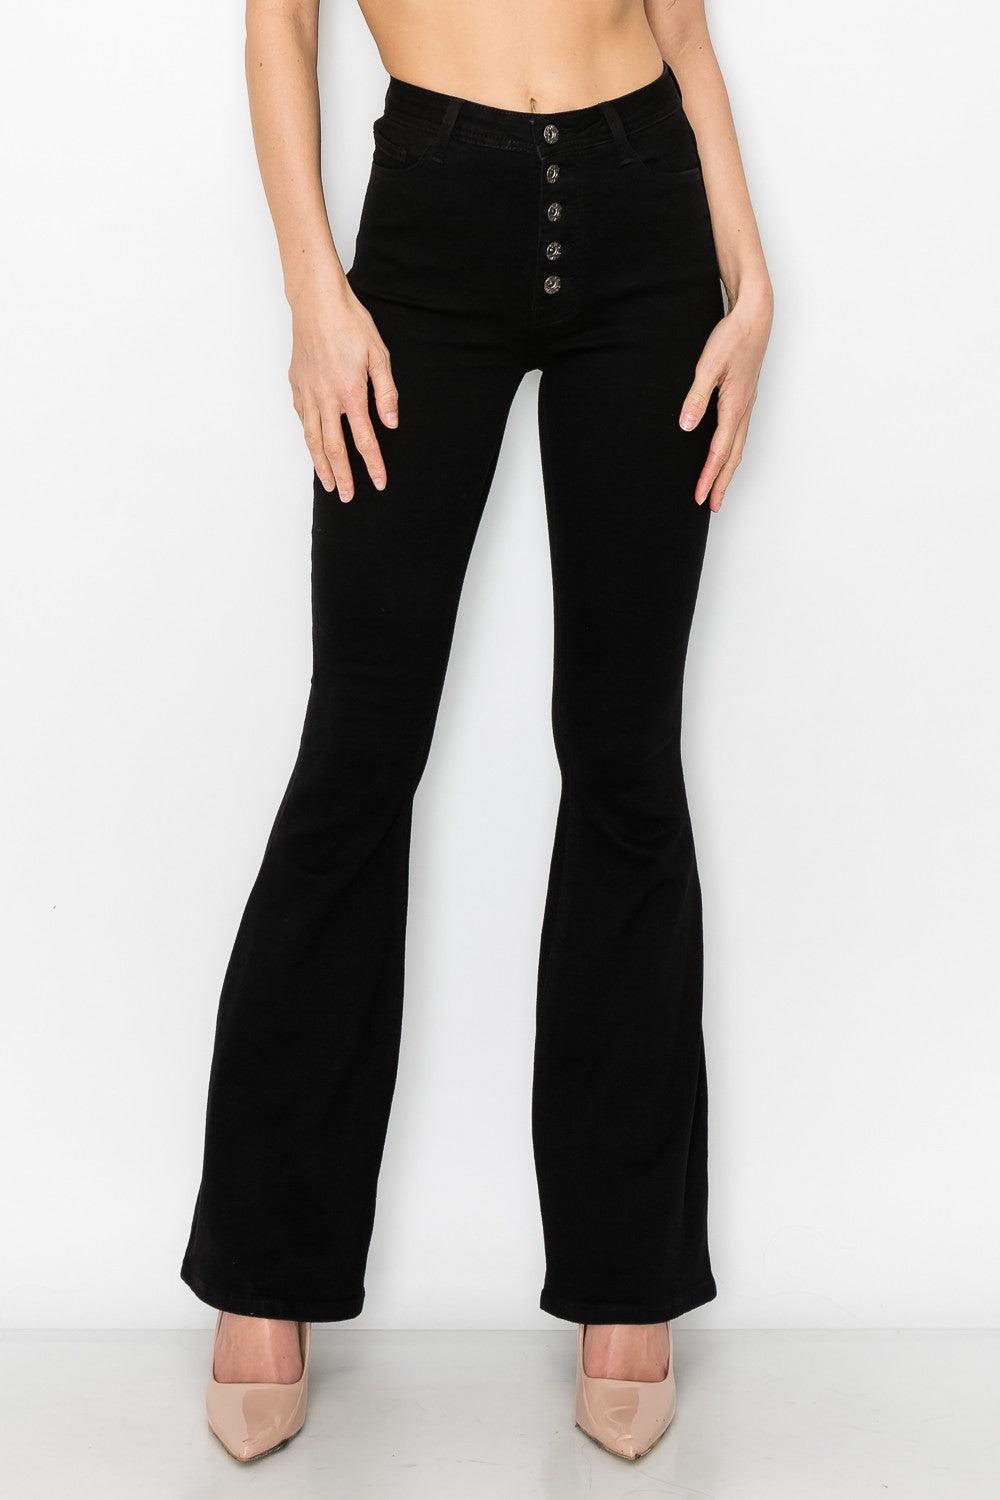 BC068 High Waist Exposed Button Fly Flare Jeans - RK Collections Boutique